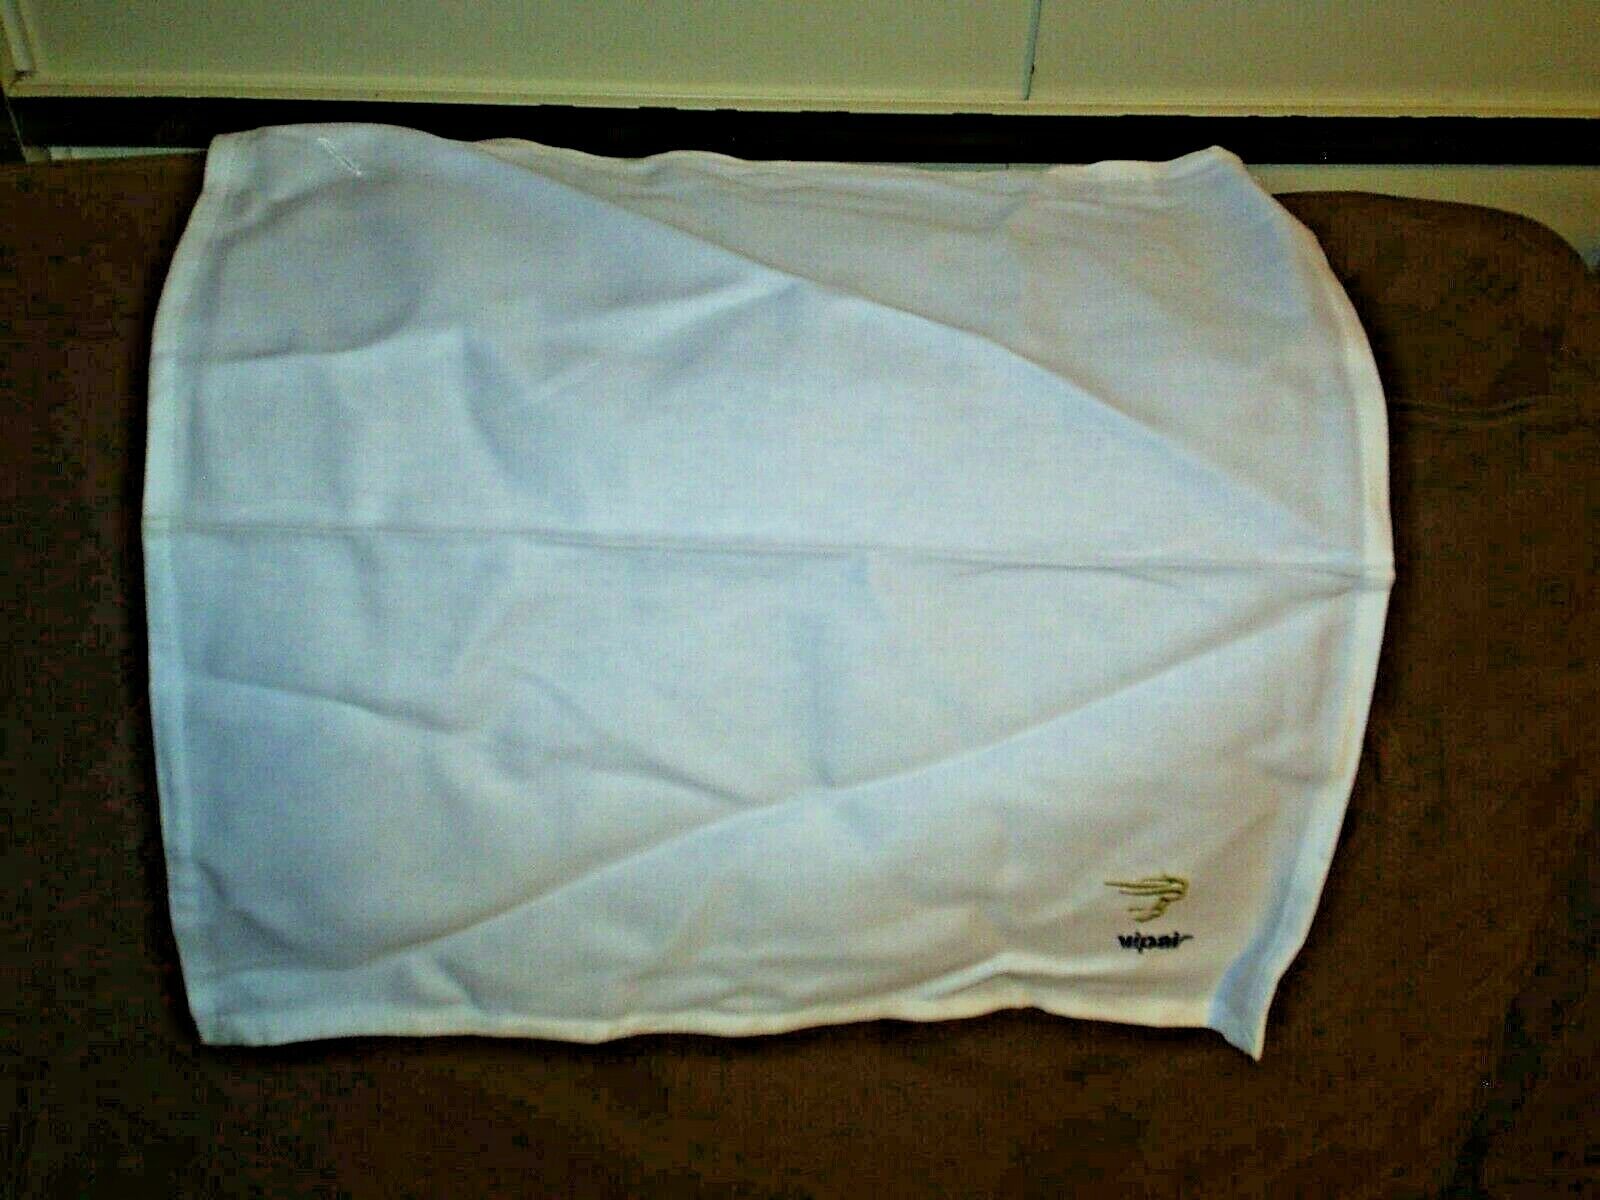 Vipair Airlines Aeroplane Seat Cover / napkin 90s airline